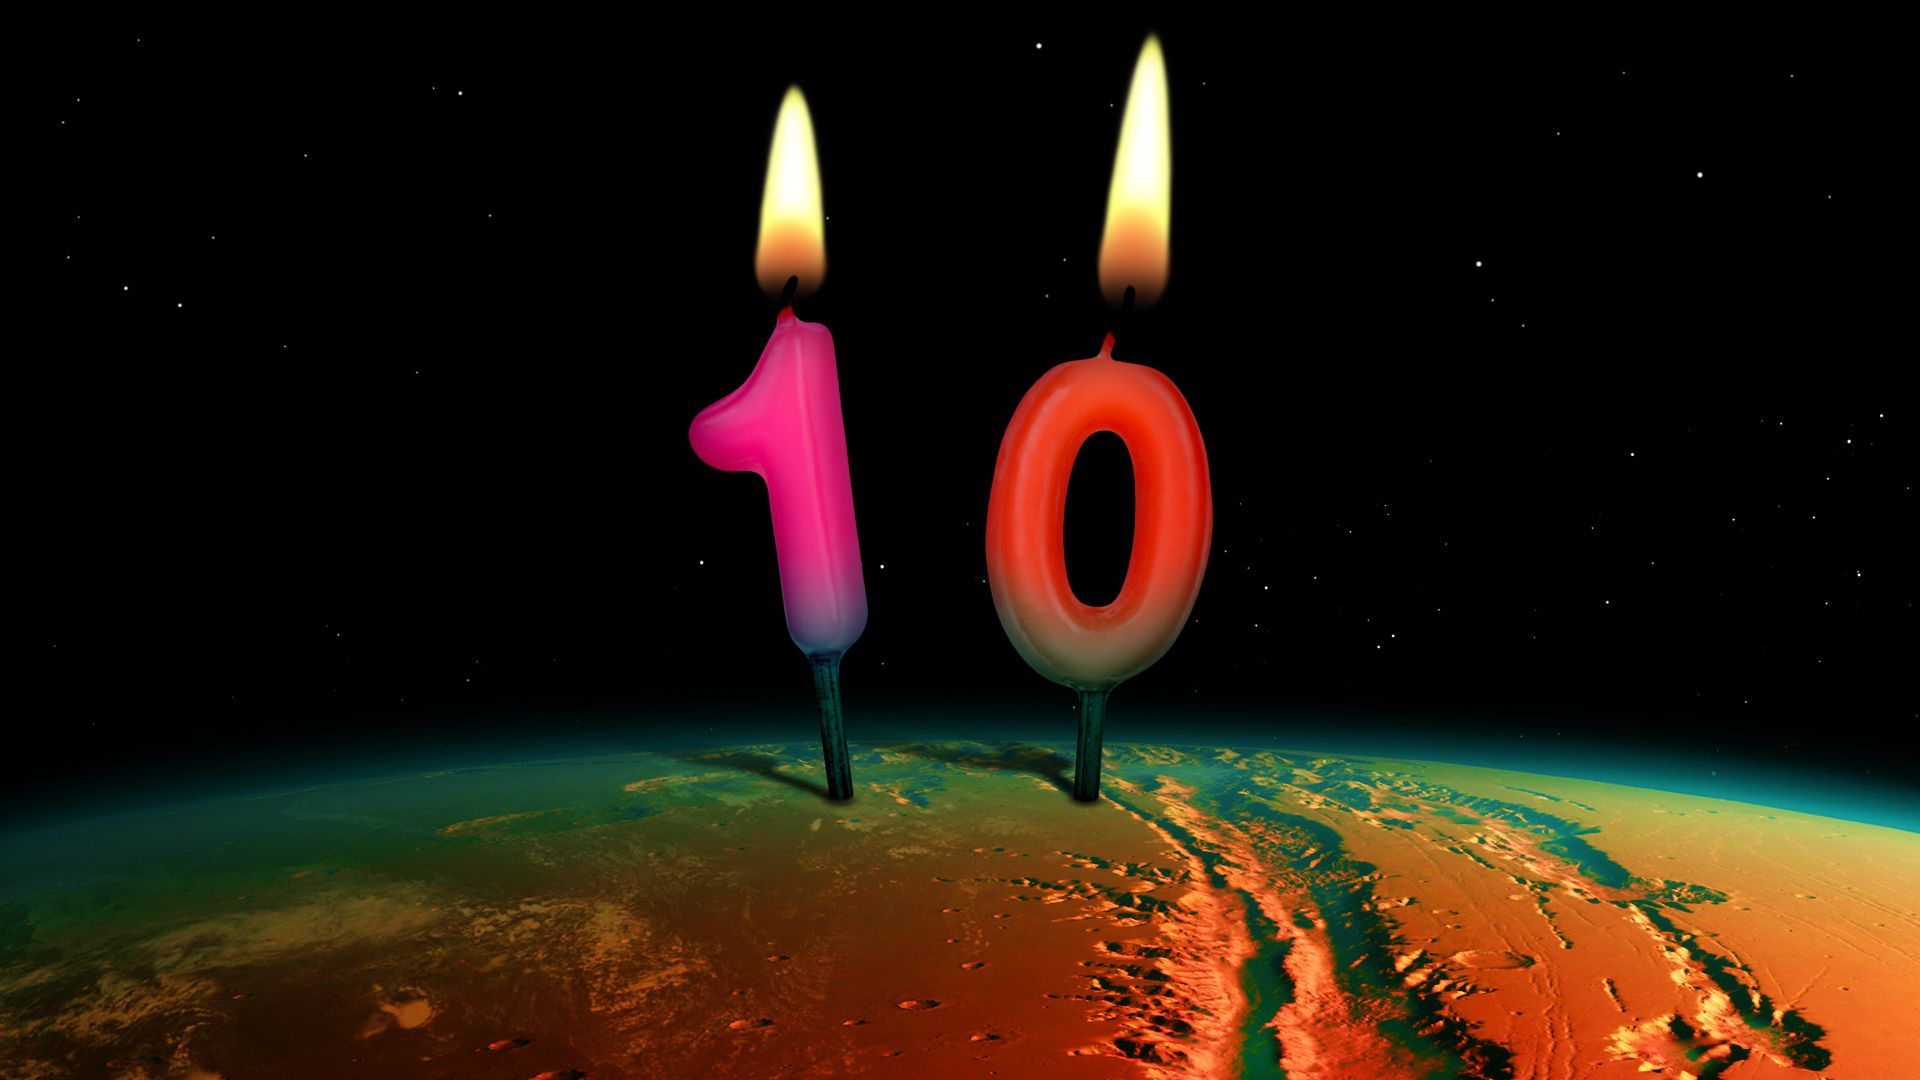 Illustration of "ten" number candles on the surface of Mars. 